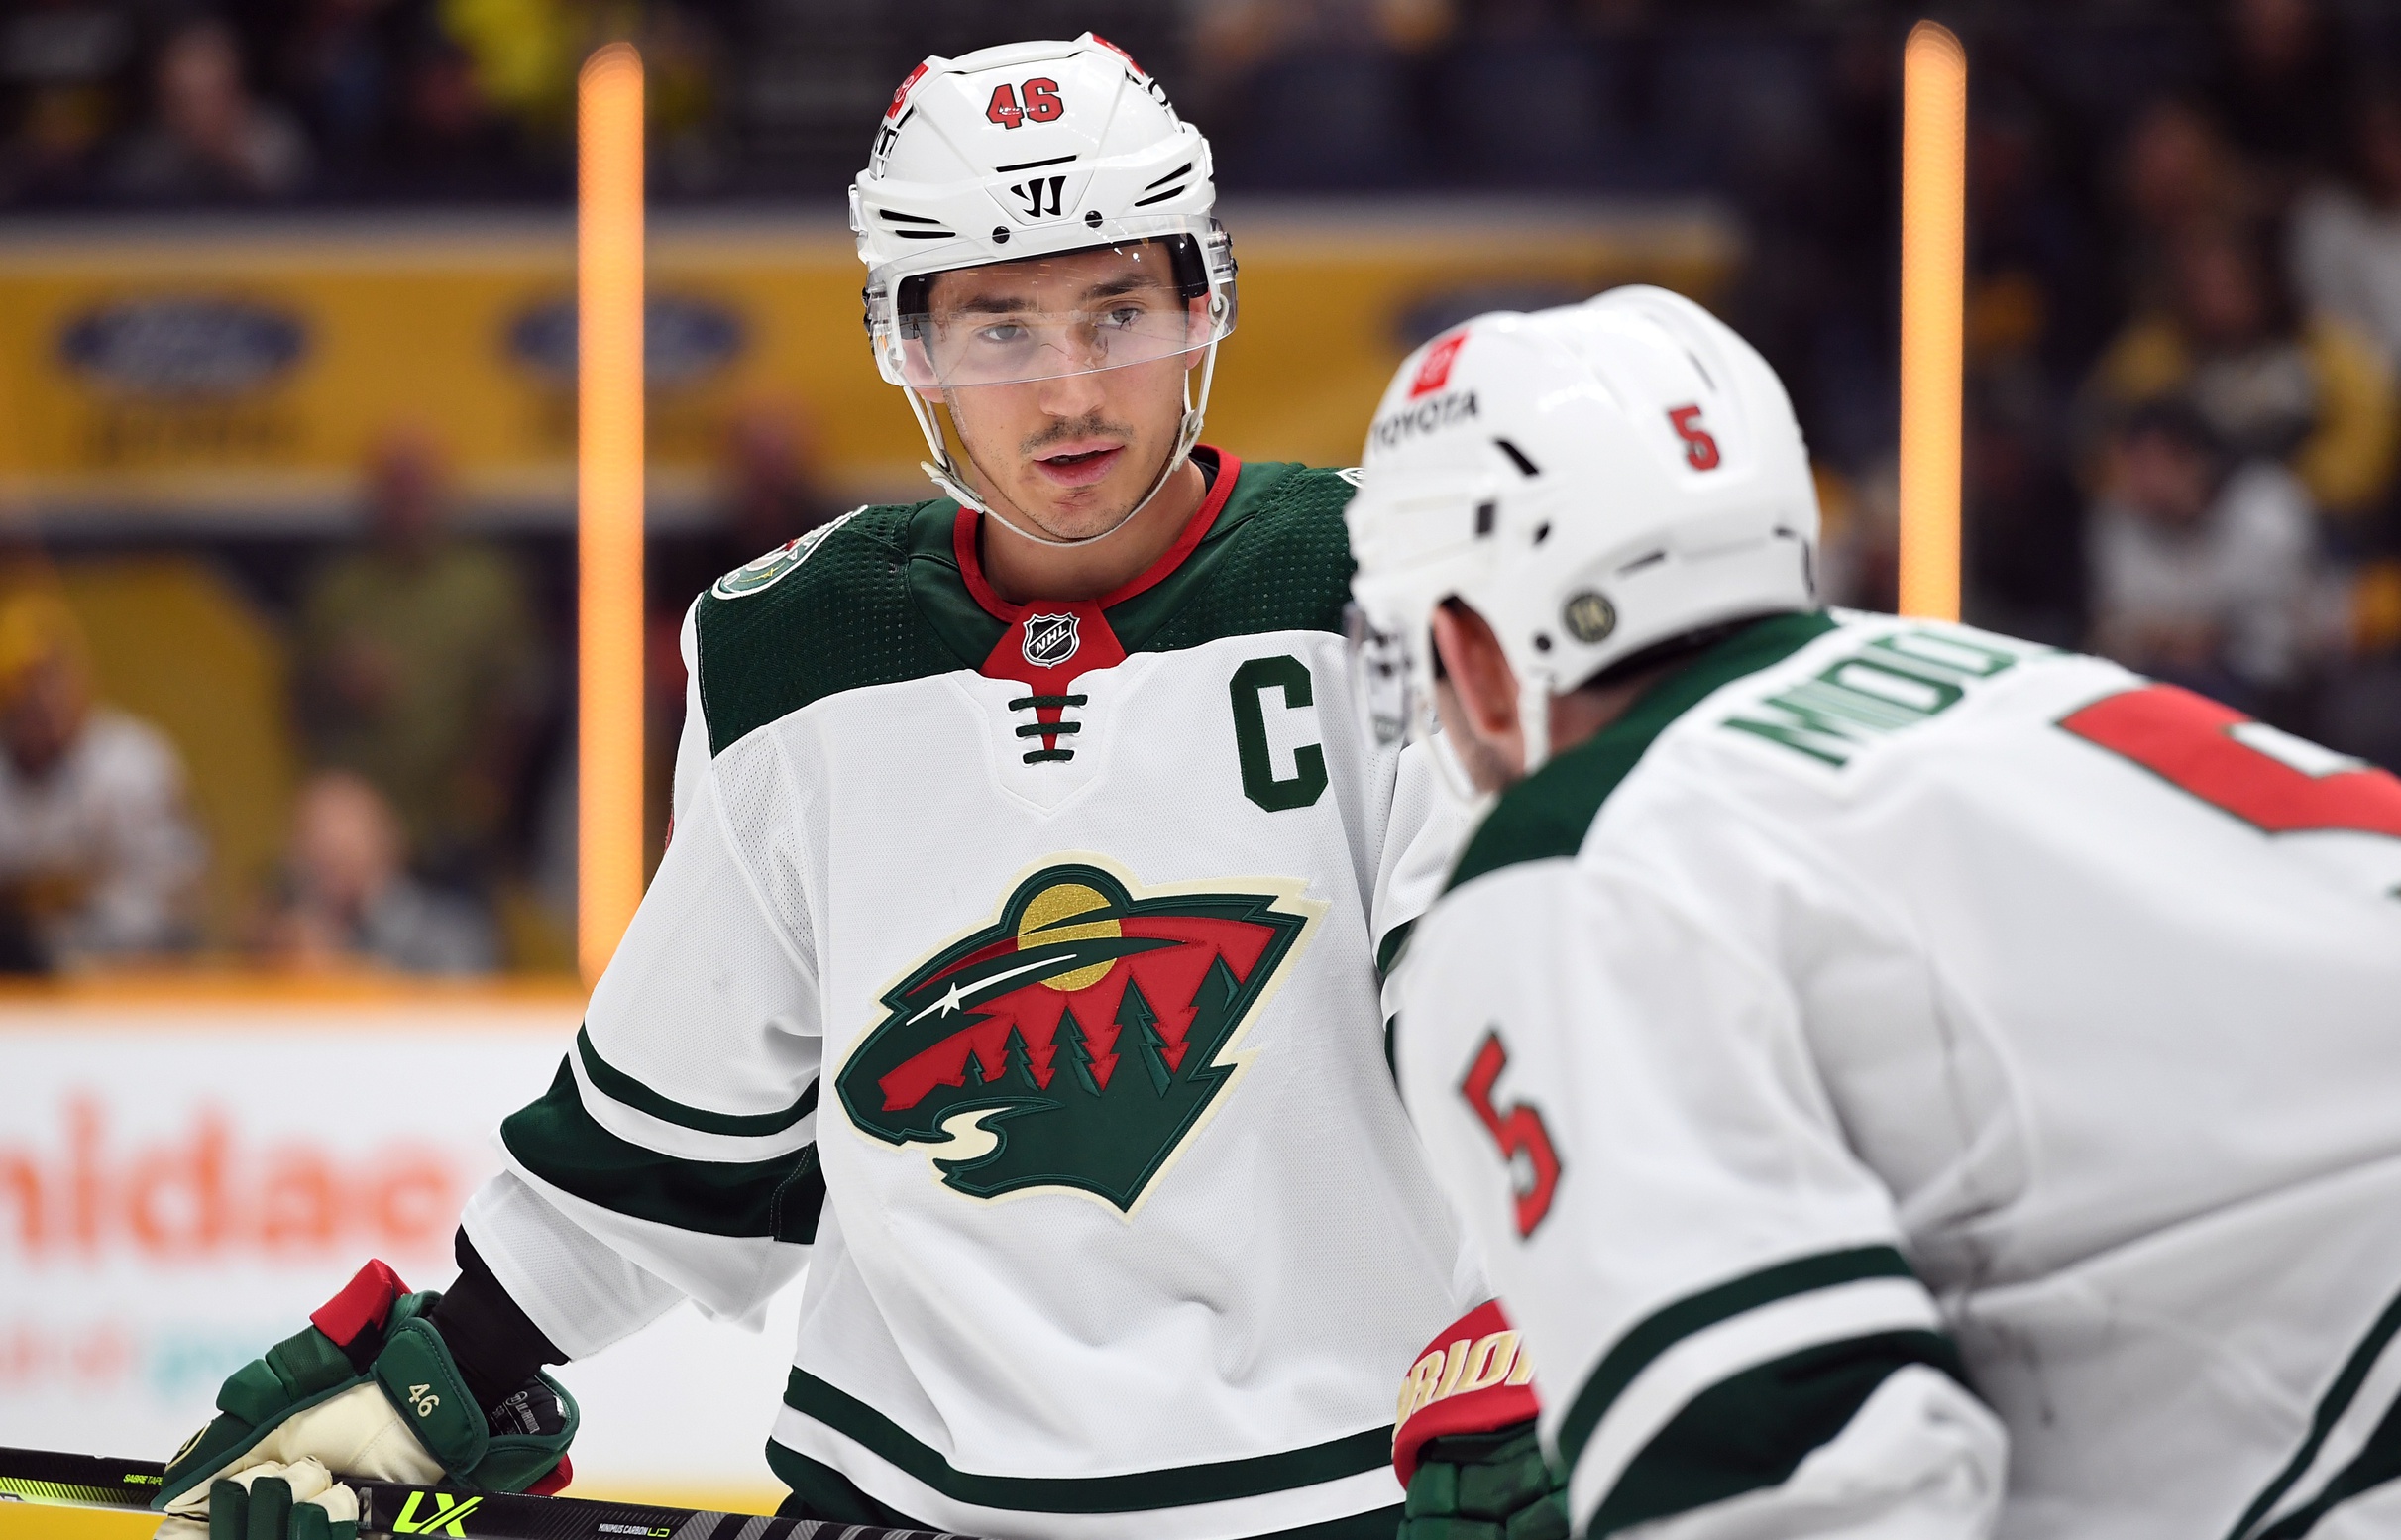 Will This Years Blue Line Live Up To the Wild Standard? - Minnesota Wild